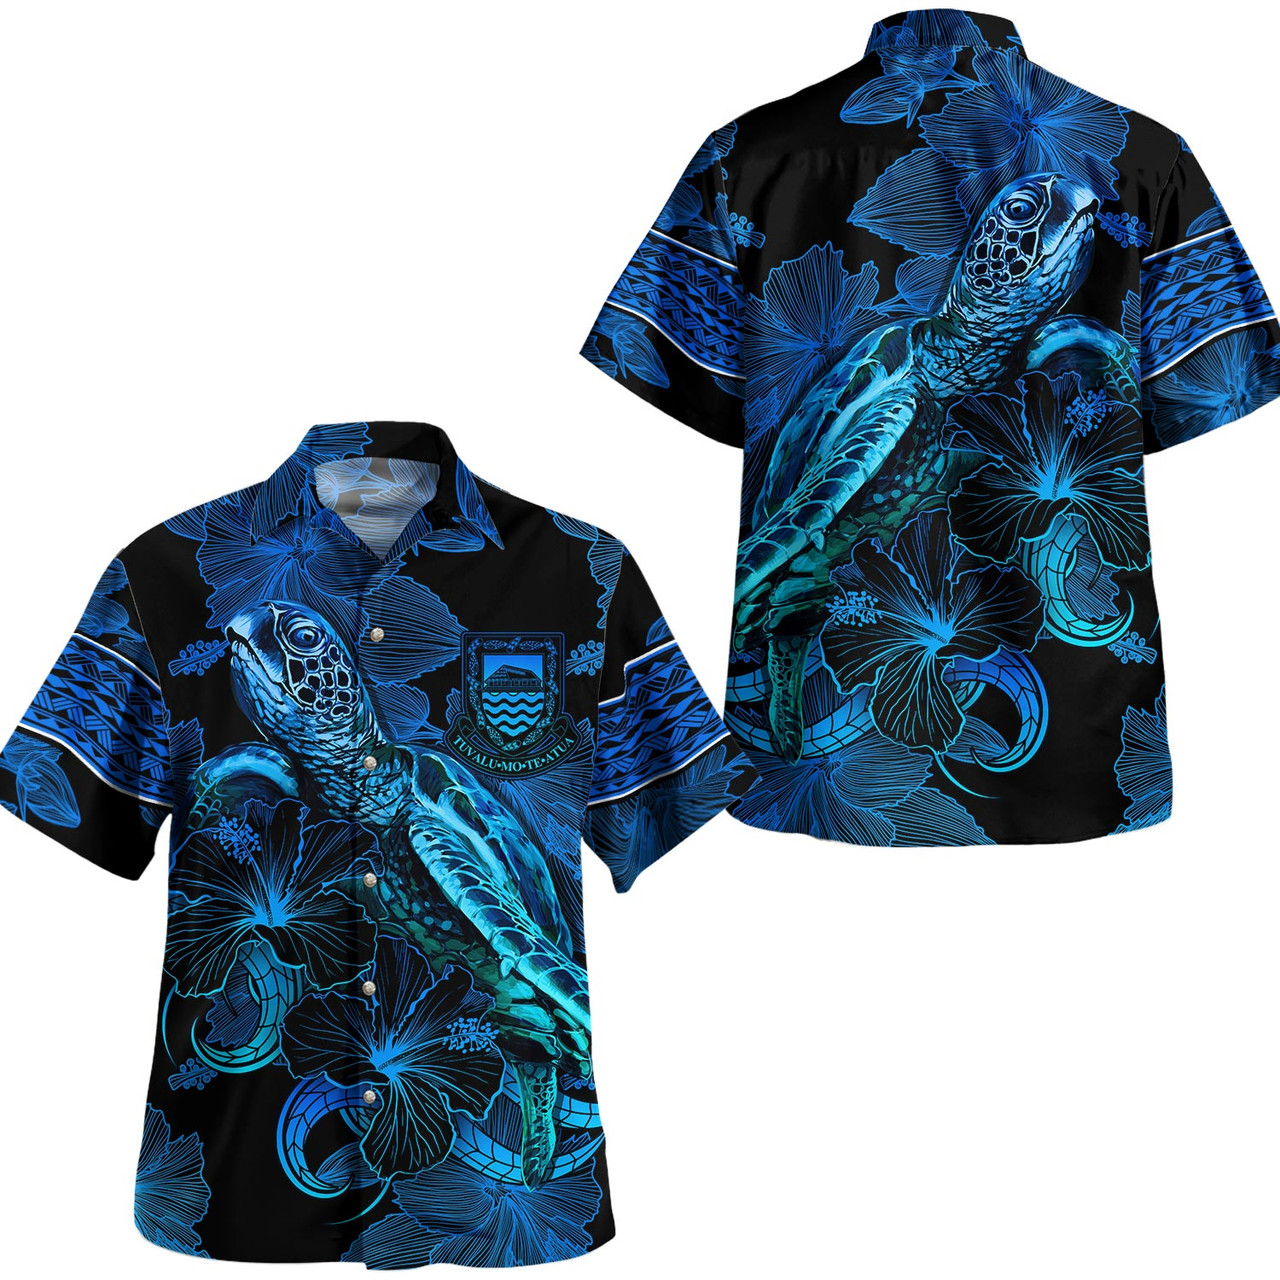 Tuvalu Combo Puletasi And Shirt Sea Turtle With Blooming Hibiscus Flowers Tribal Blue